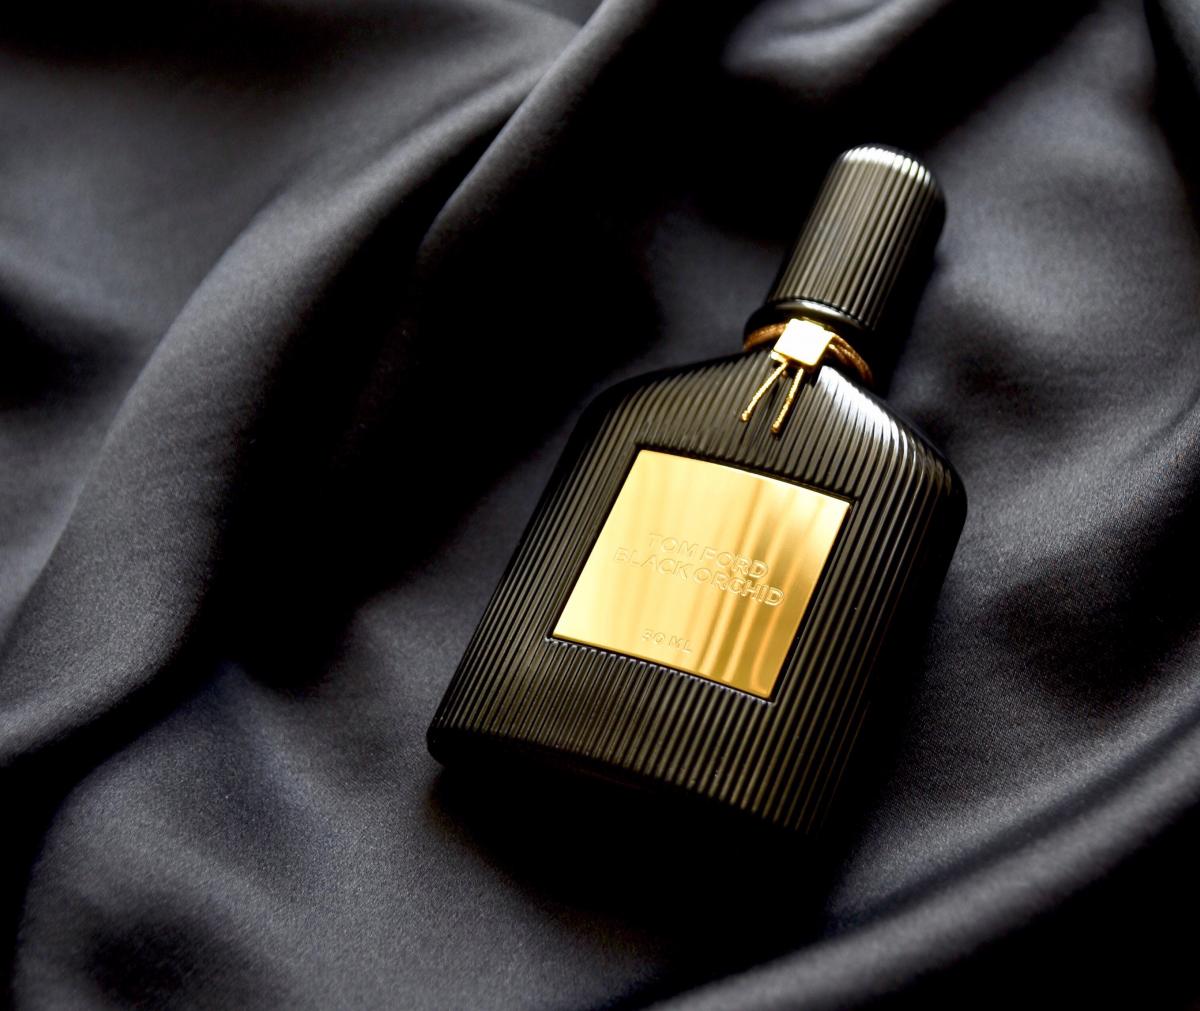 Tom ford orchid мужские. Tom Ford Black Orchid Parfum. Духи том Форд Блэк орхид. Том Форд духи Black Orchid. 12 Ml Tom Ford Black Orchid.